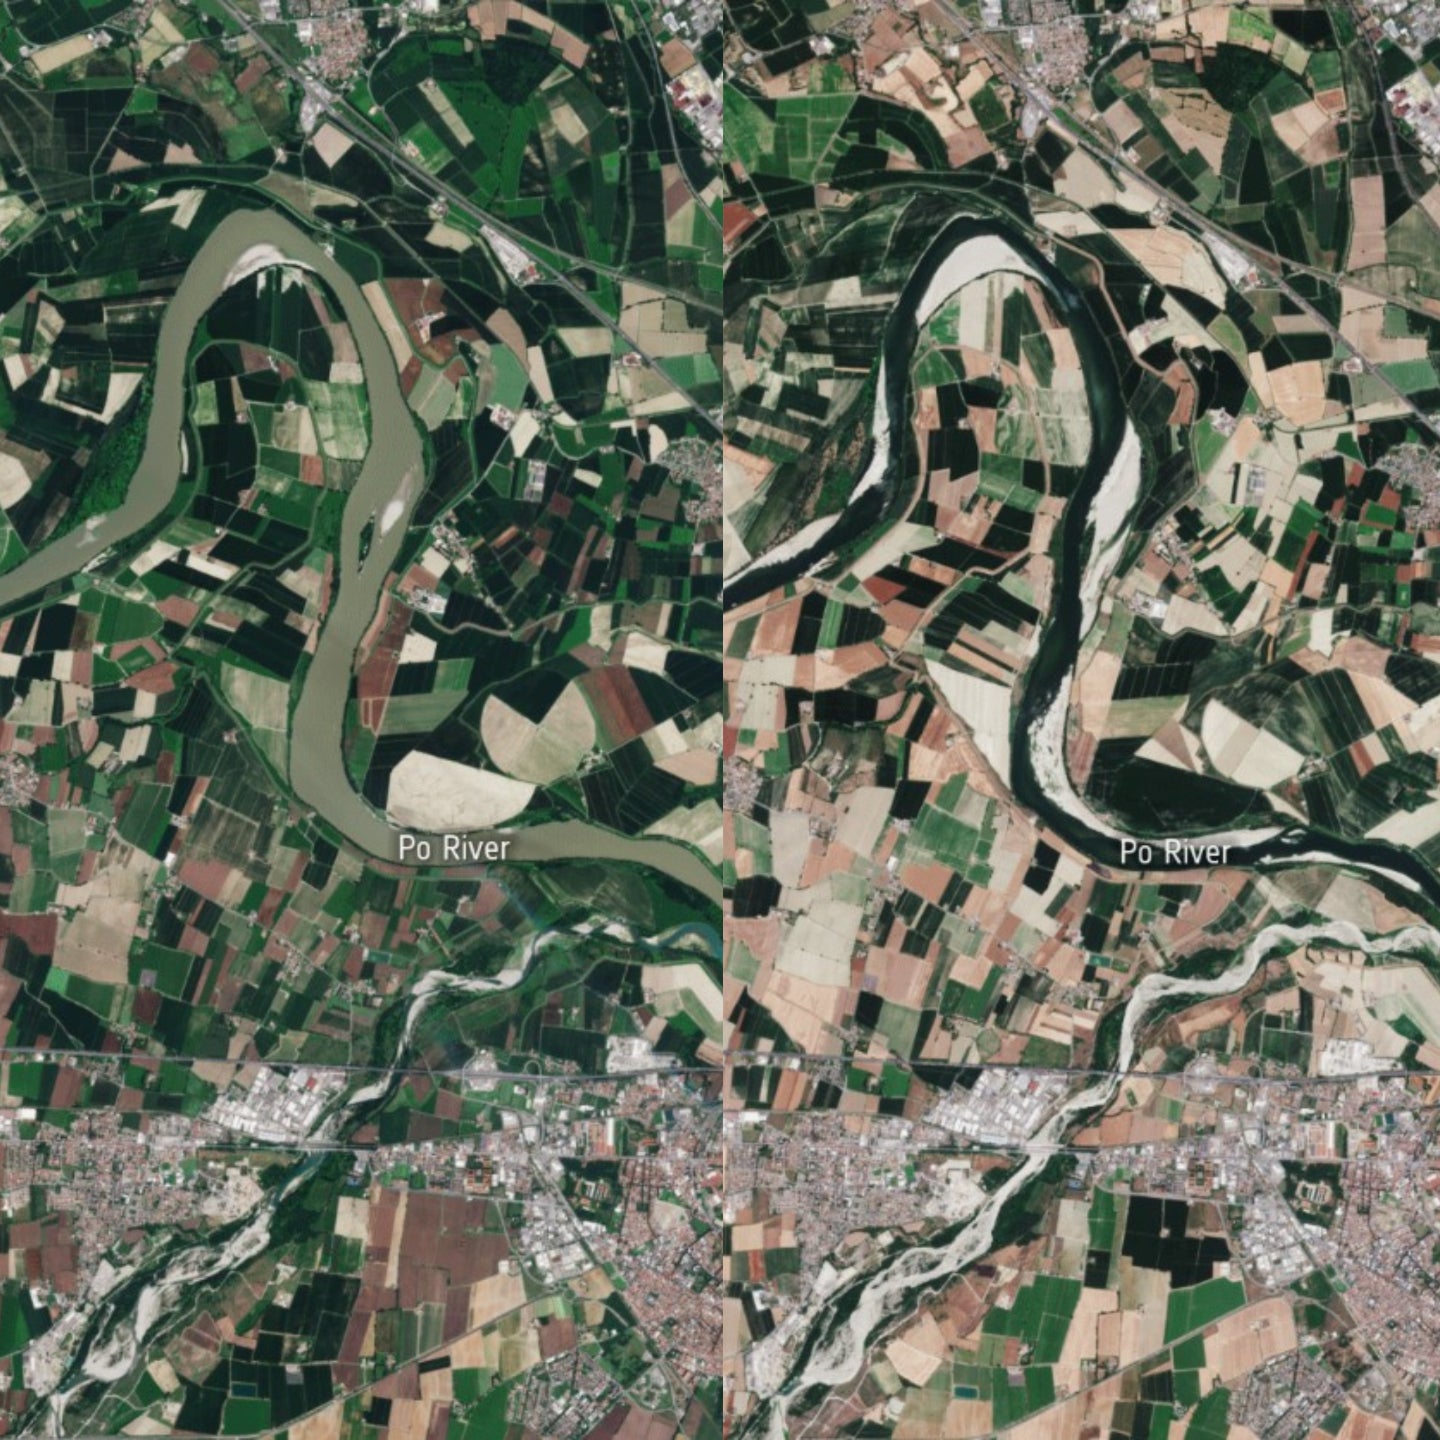 These ESA Copernicus Sentinel-2 images reveal how the river has significantly shrunk between June 2020 and June 2022